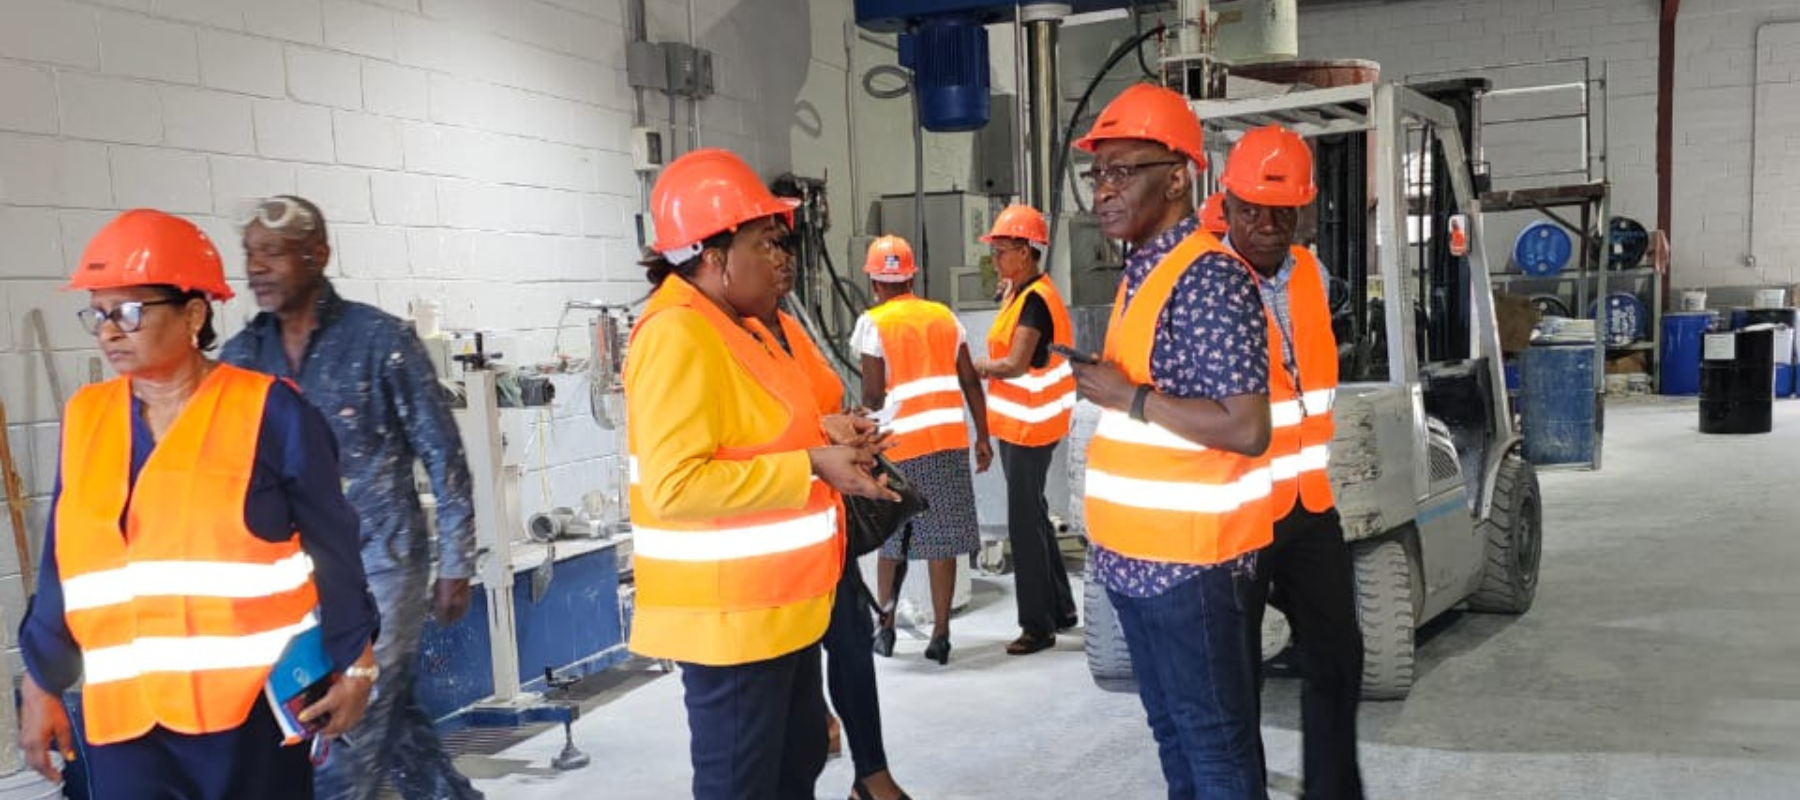 Antigua Government Officials in discussion at Harris Paints Factory in Antigua